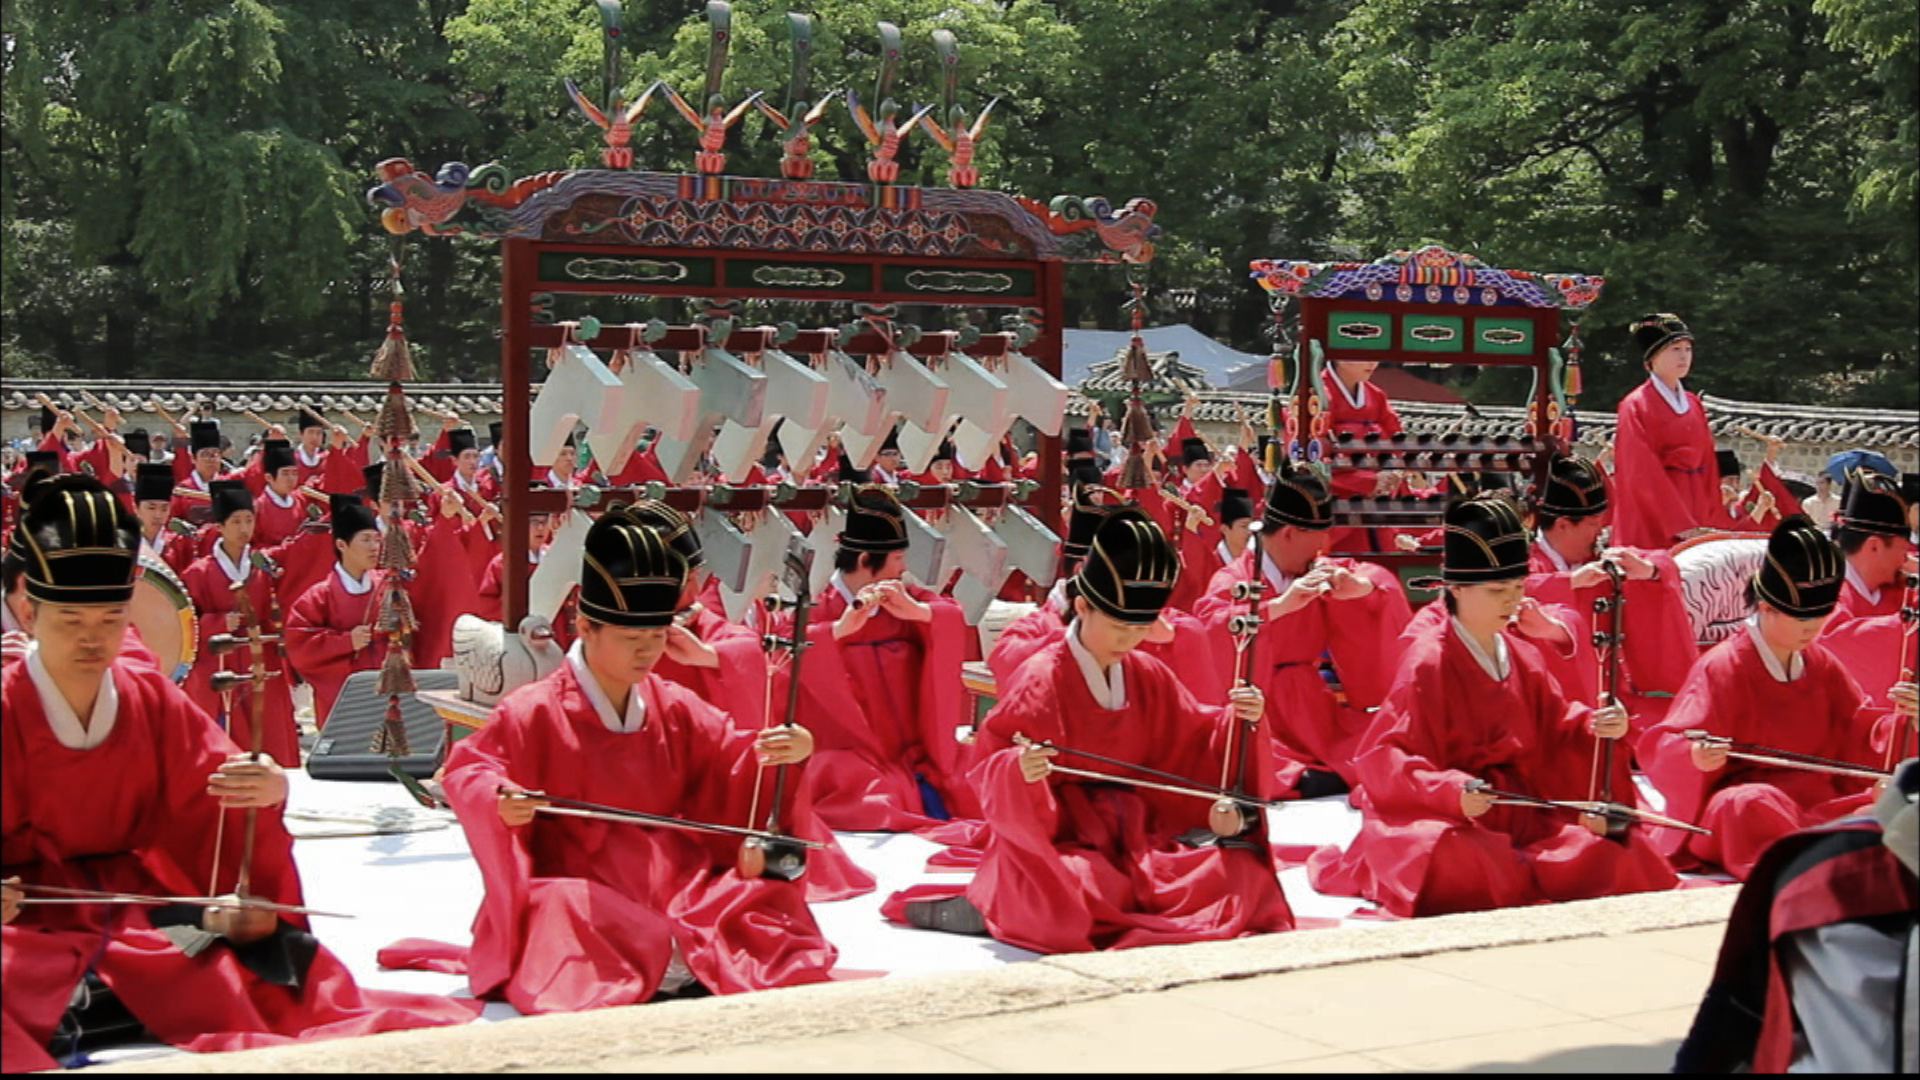 Yeongdong, Center of Traditional Korean Music, Sets Sights on Unesco’s